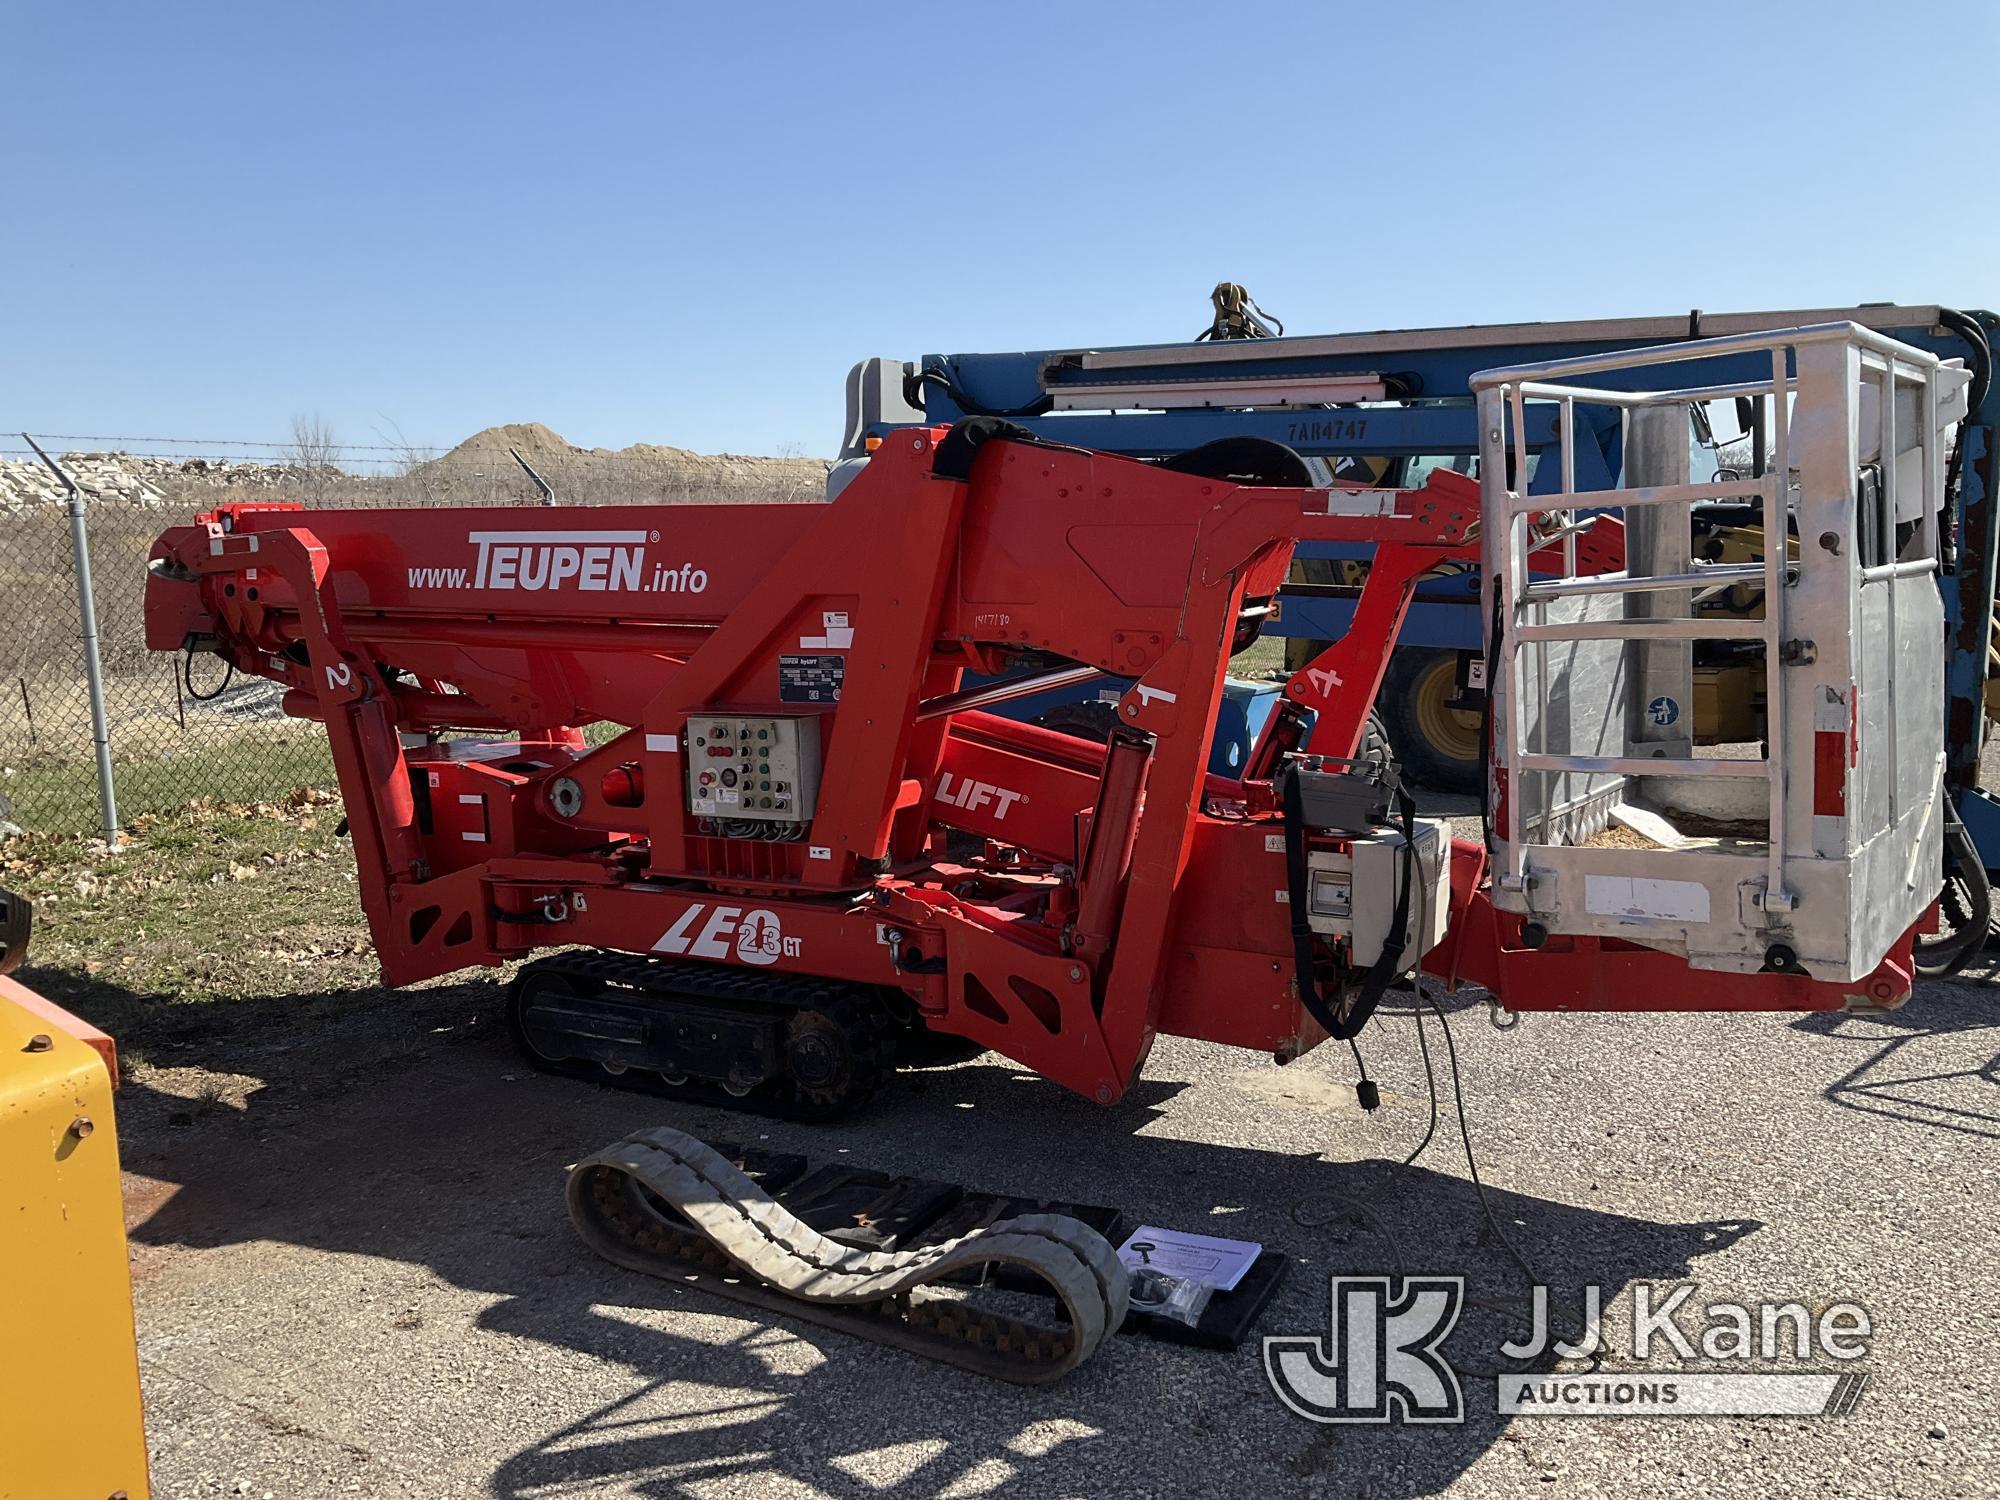 (Kansas City, MO) Teupen Hylift Leo 23 GT Runs, Moves, Upper Unit Has Electrical Issue